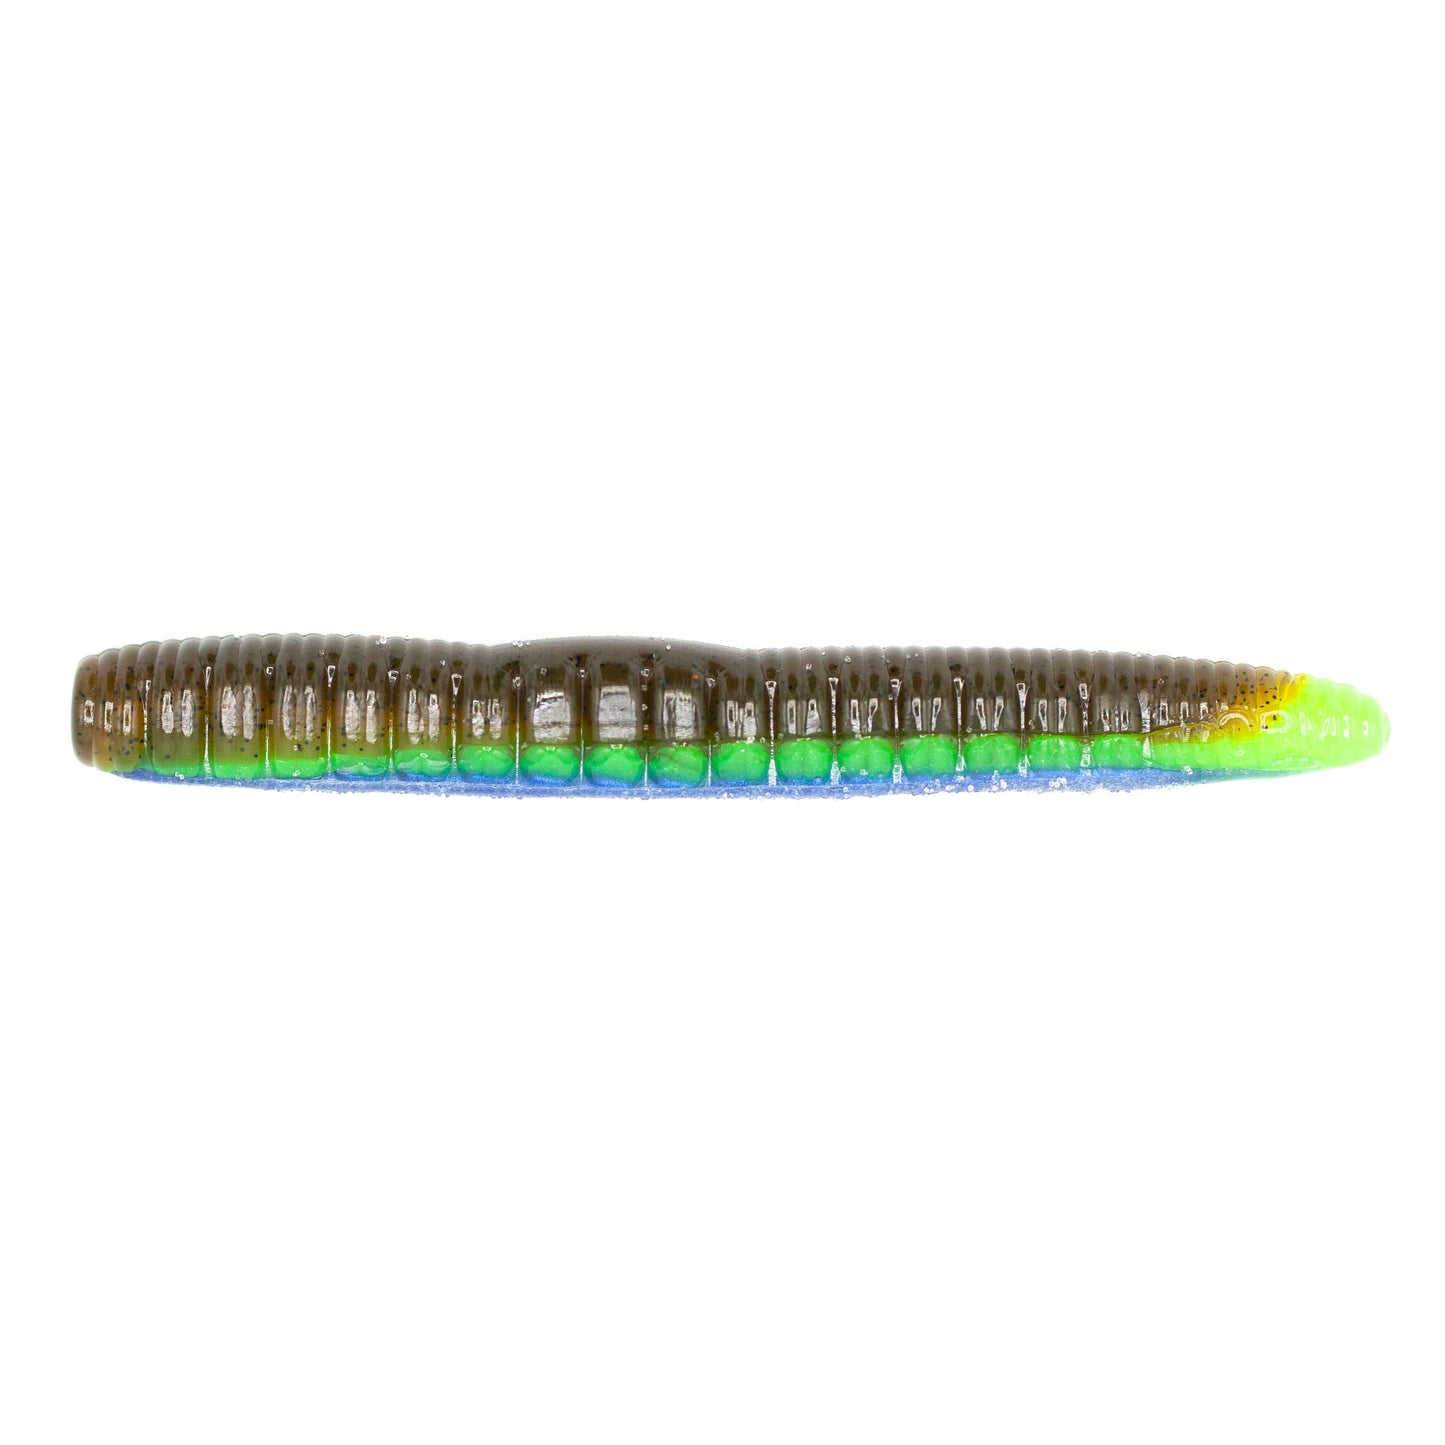 Roboworm 3" Ned 8 per pack